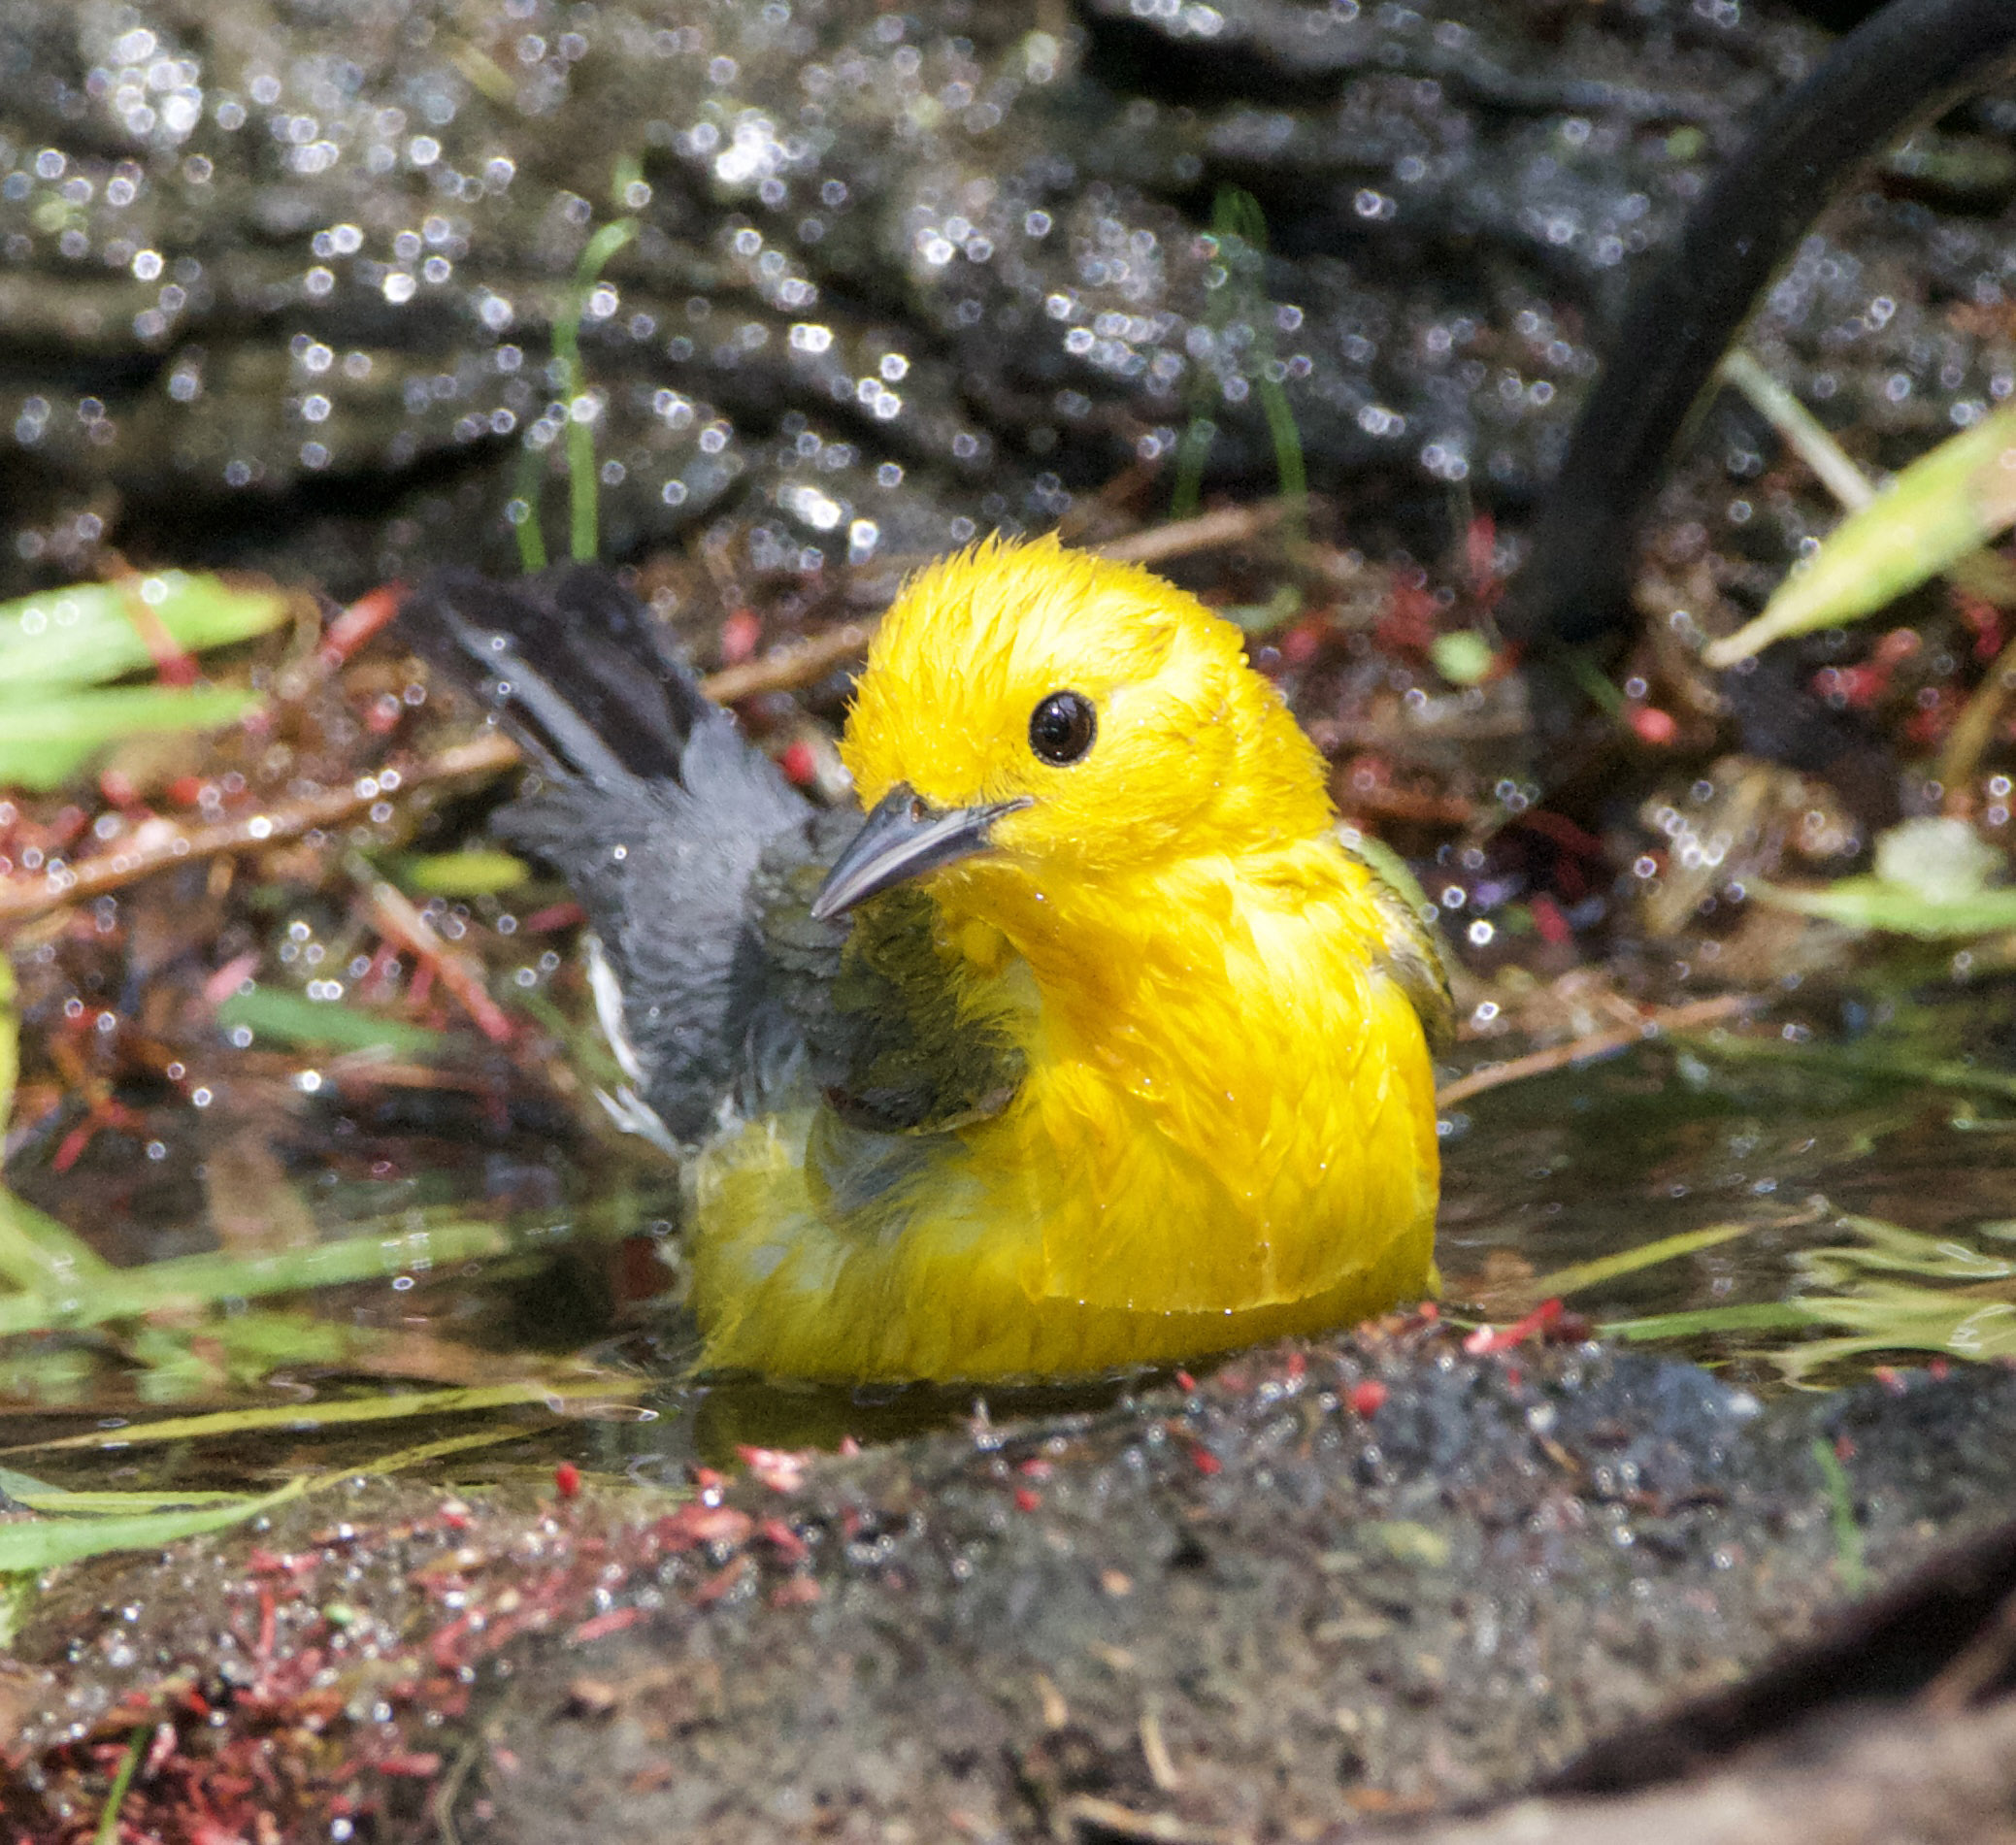 Prothonotary Warbler by Jessica Dyszel